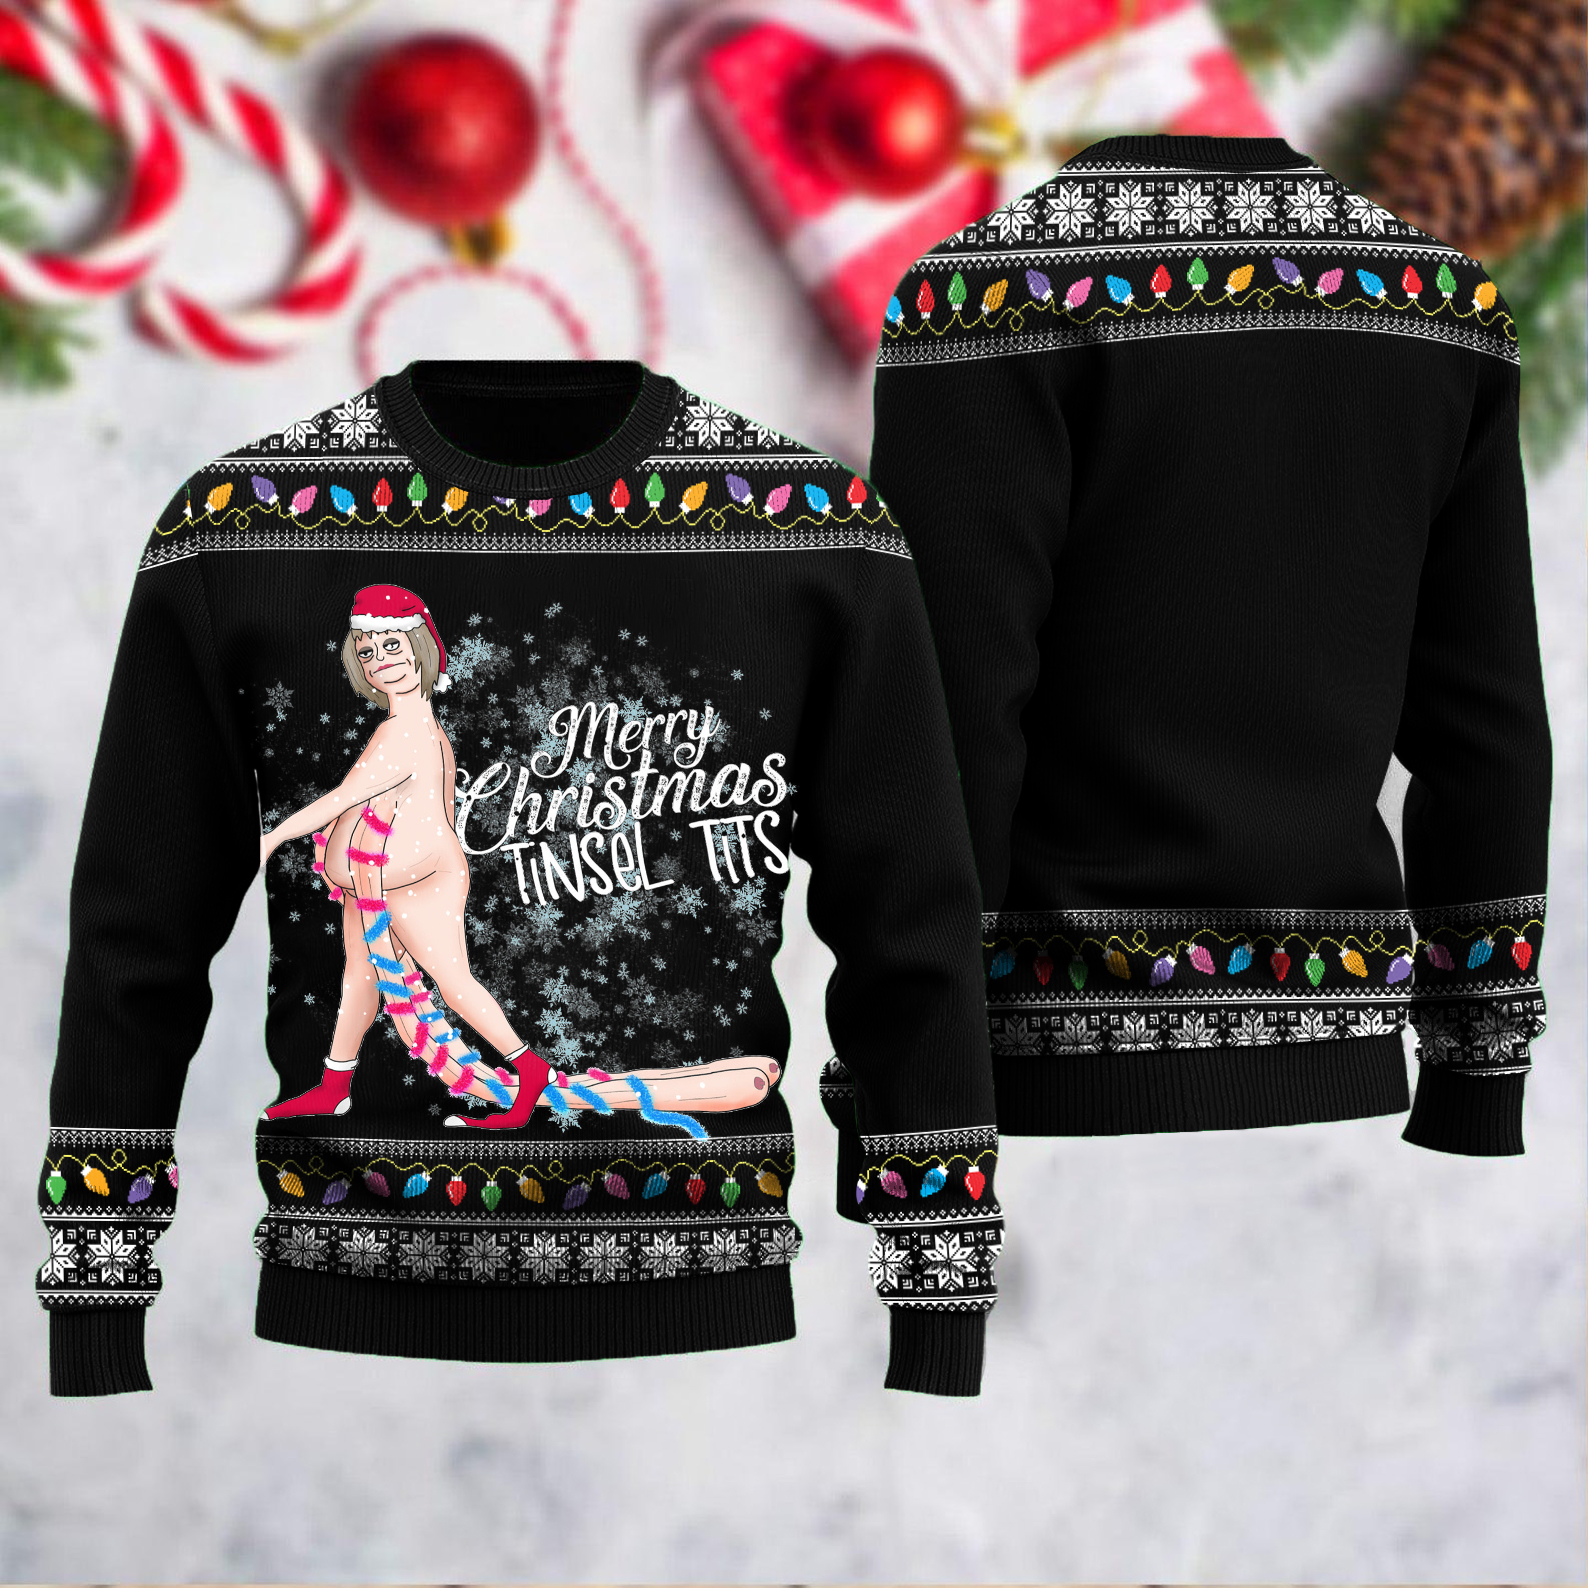 Ugly Christmas Dirty Christmas Merry Christmas Tinsel Tits Print Knit Pullover Sweater